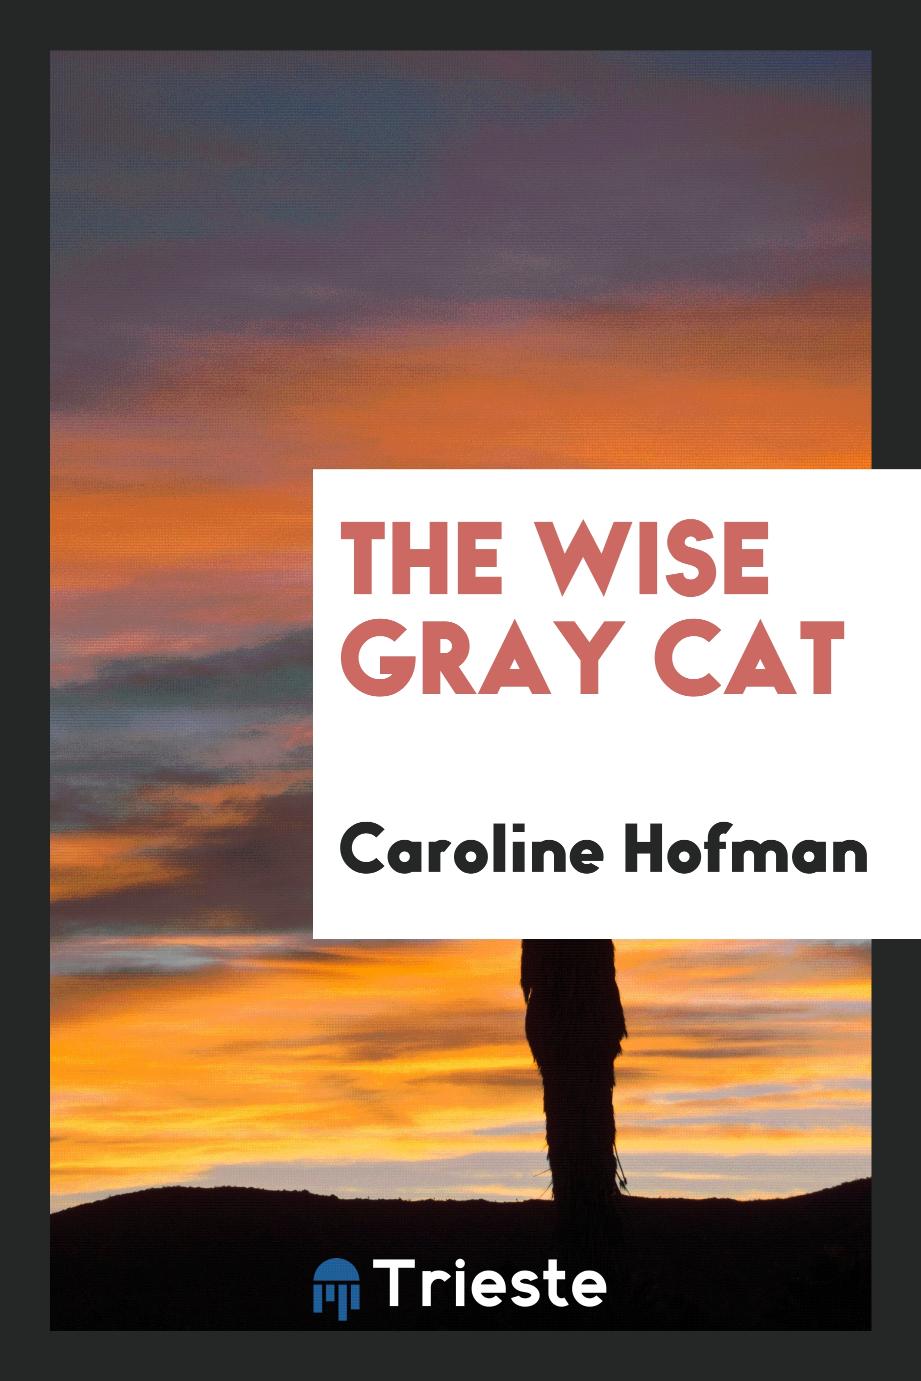 The Wise Gray Cat